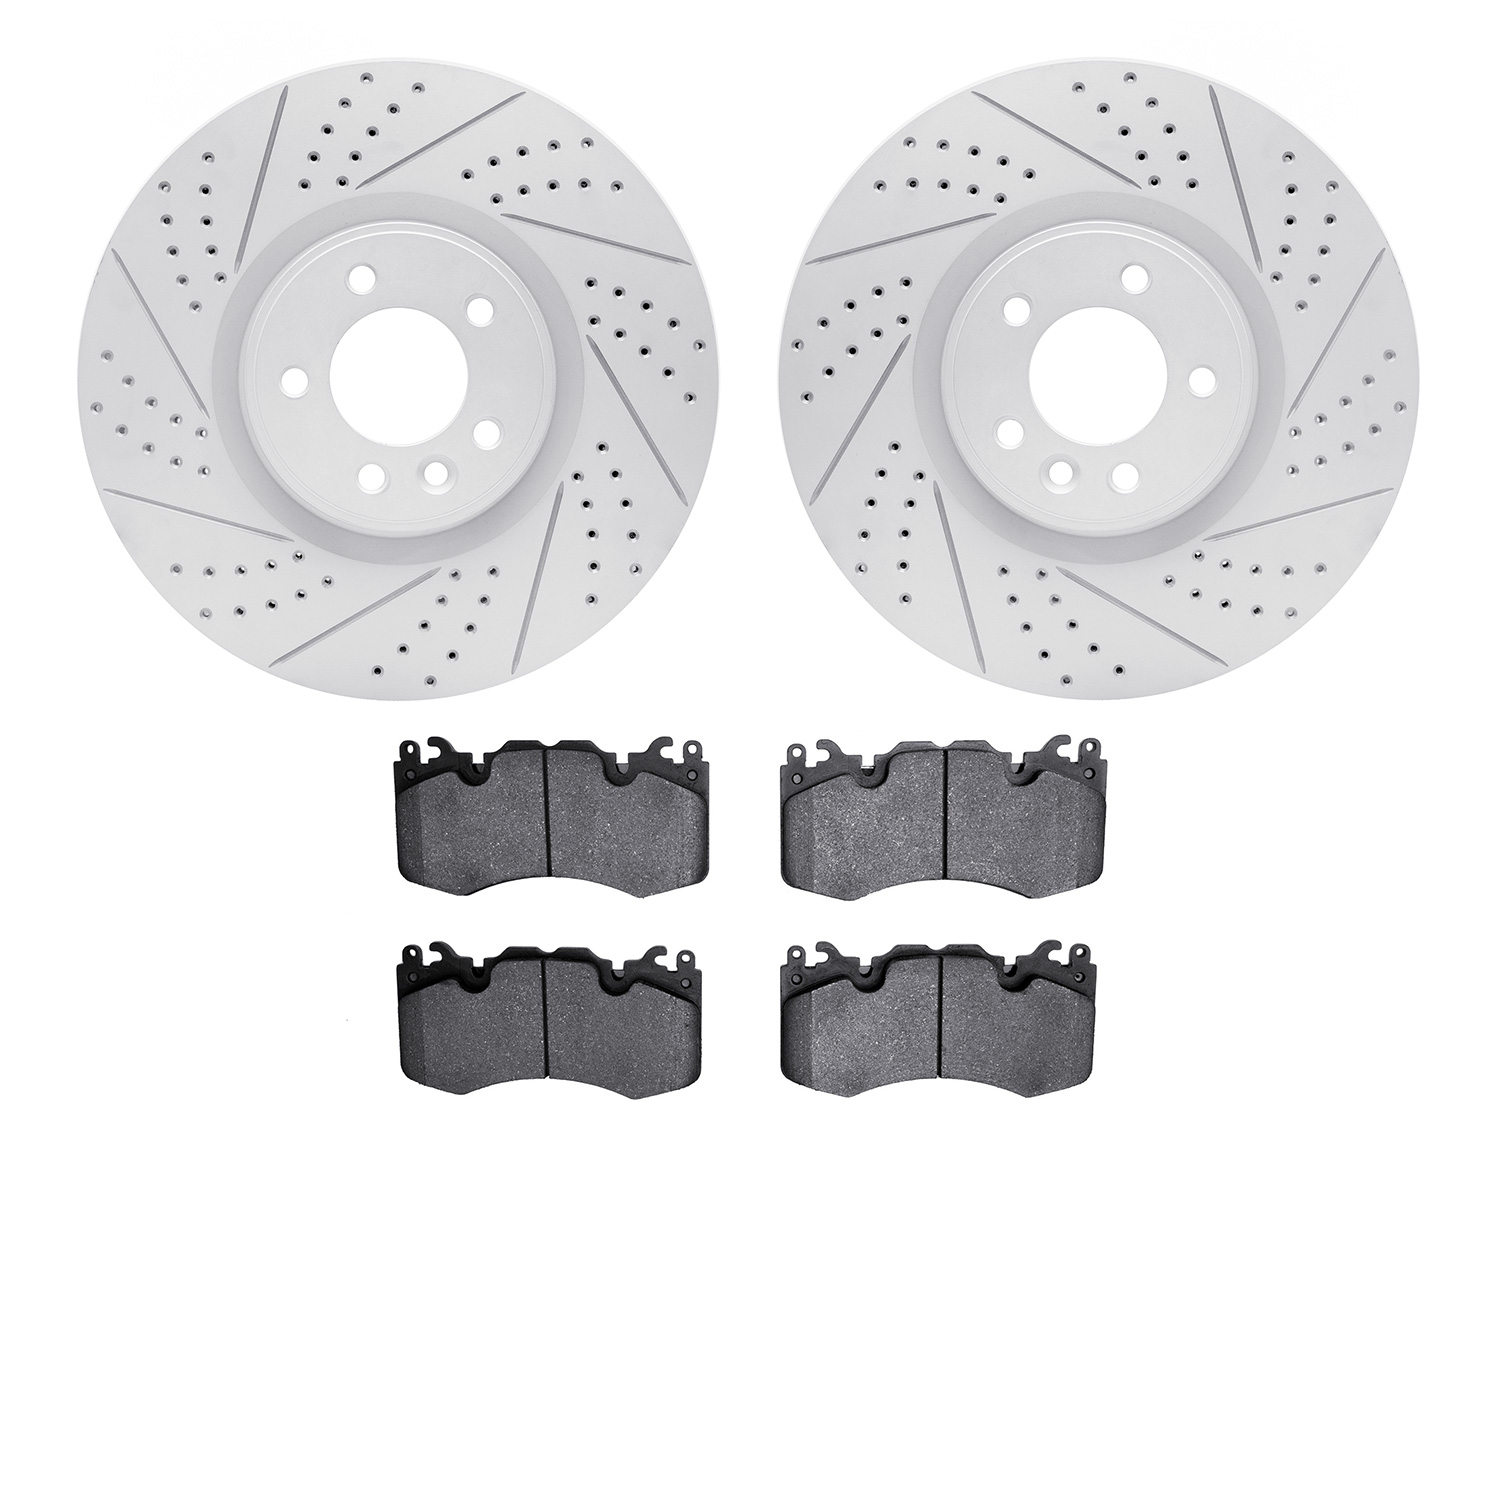 2502-11022 Geoperformance Drilled/Slotted Rotors w/5000 Advanced Brake Pads Kit, 2010-2017 Land Rover, Position: Front